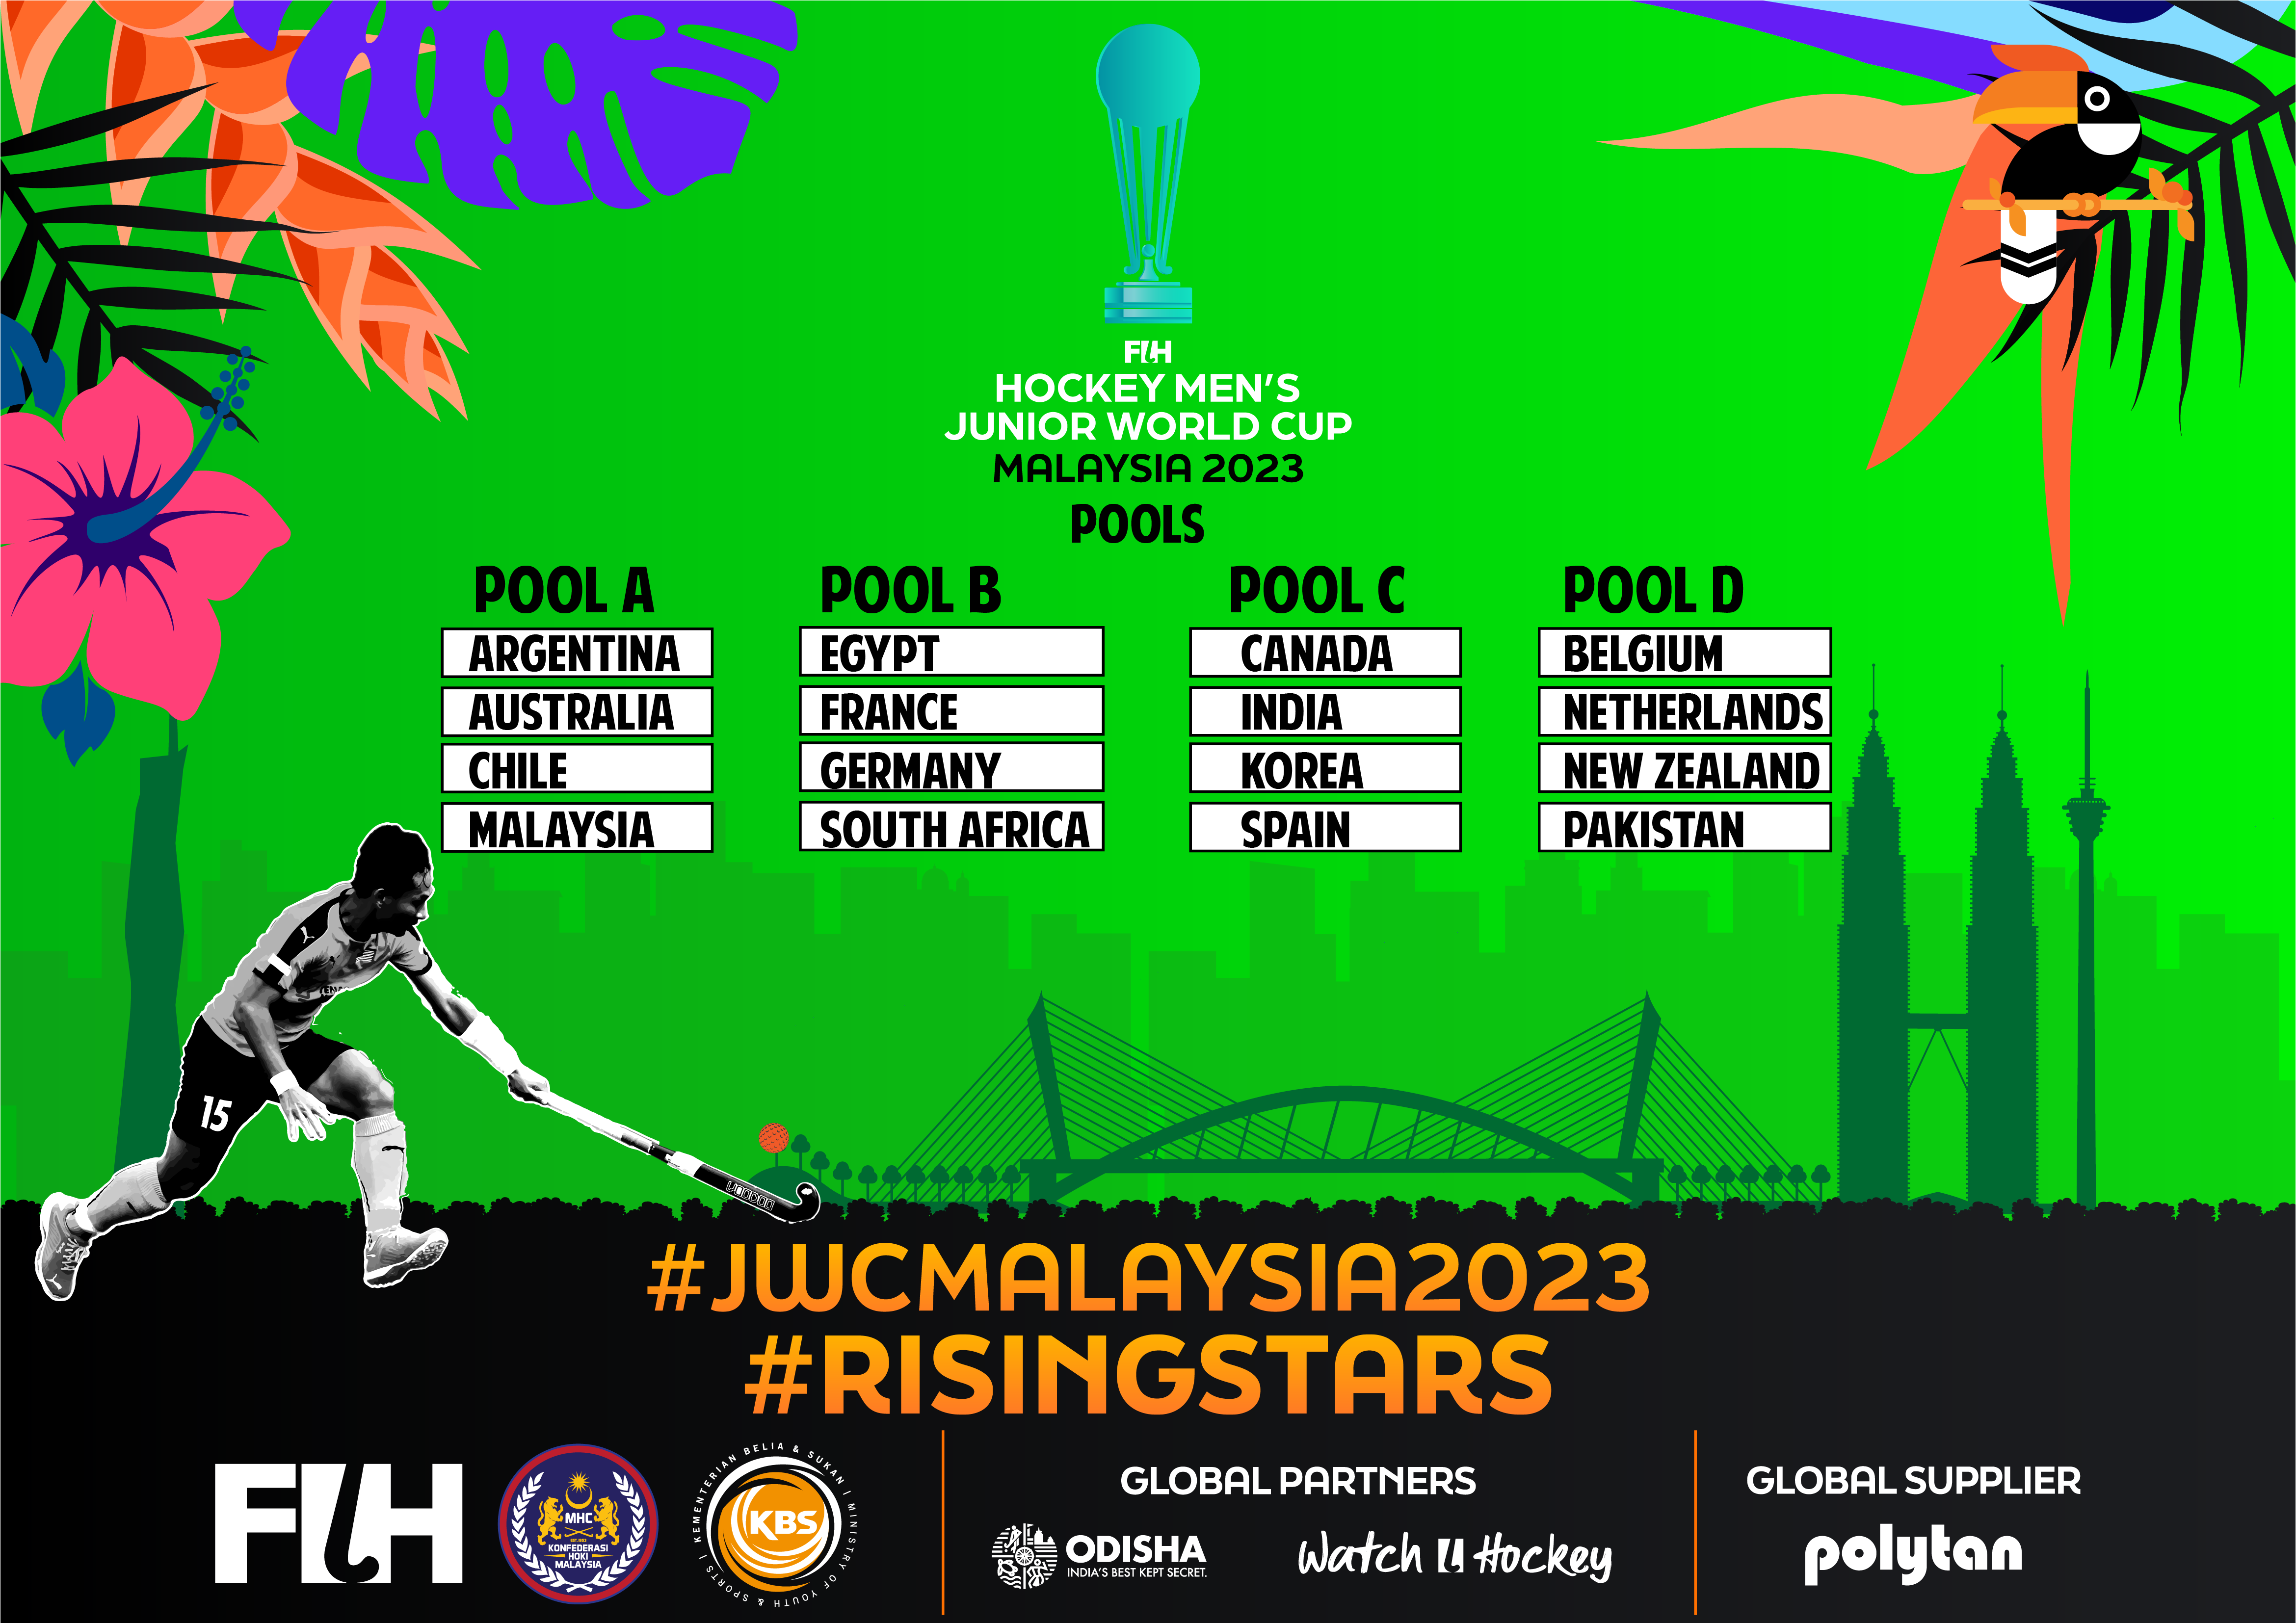 FIH Hockey Mens Junior World Cup Malaysia 2023 pools and match schedule revealed!